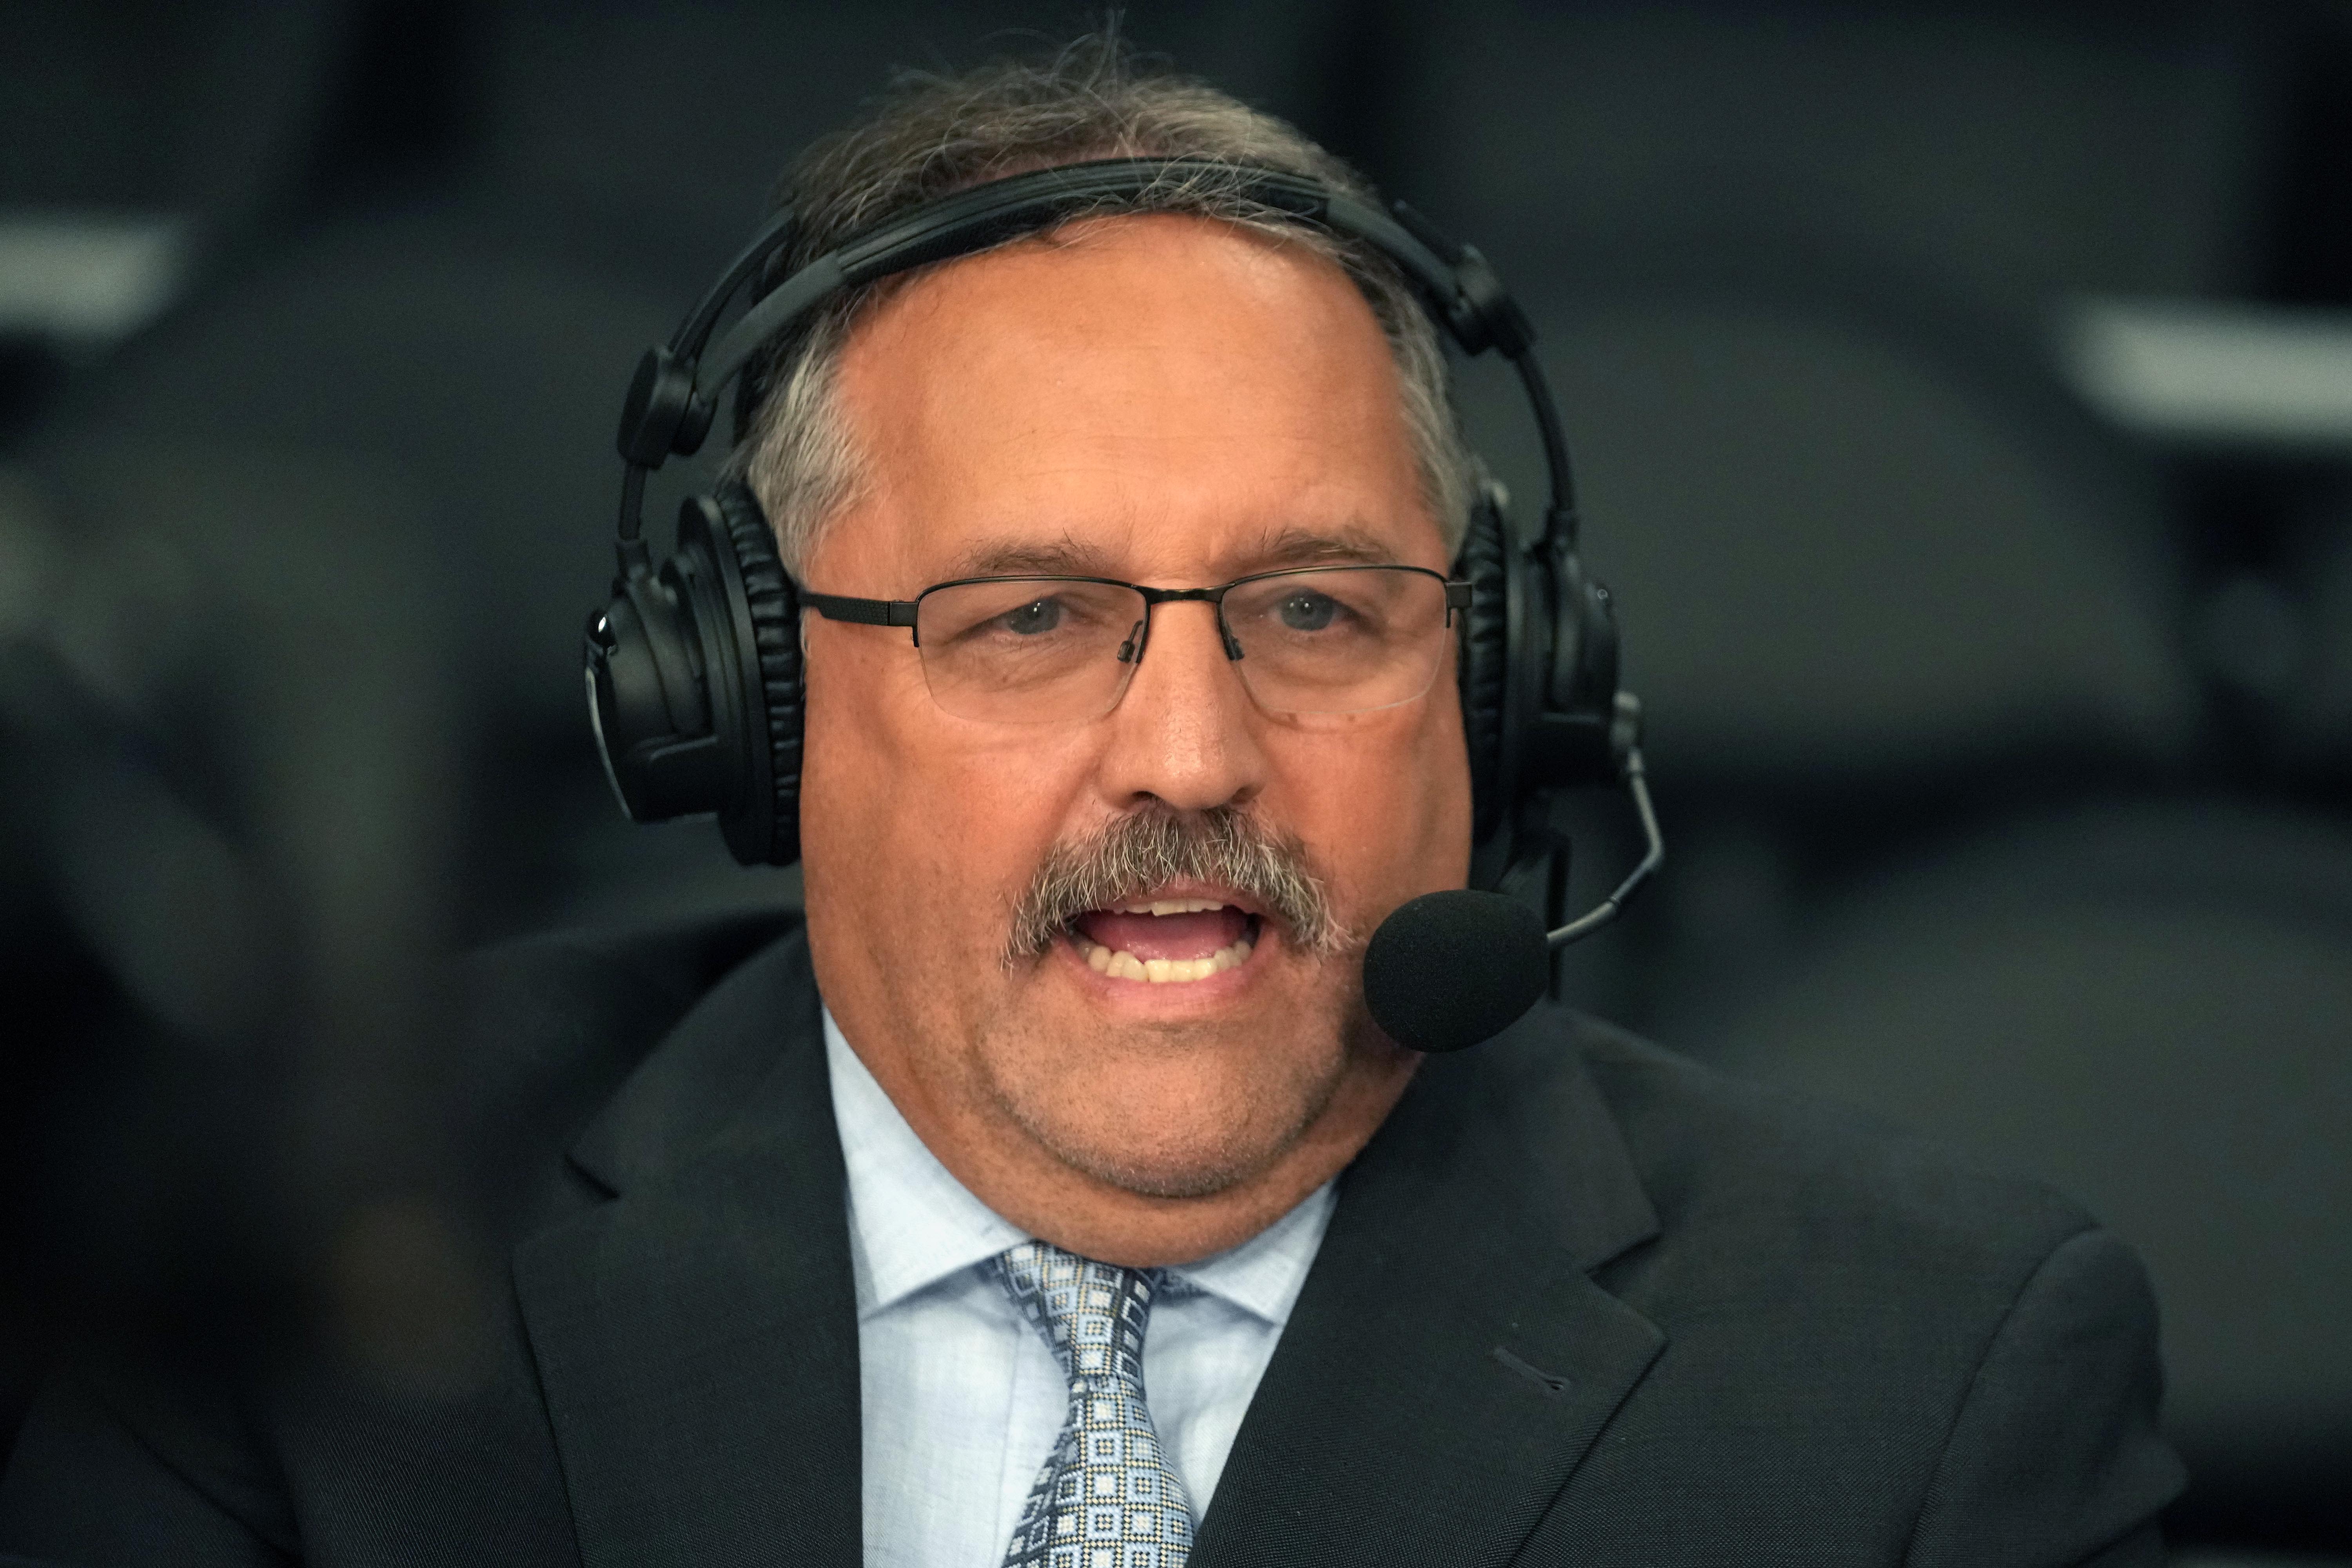 Stan Van Gundy reveals wife's cause of death was suicide: 'I'll never ... get over that'